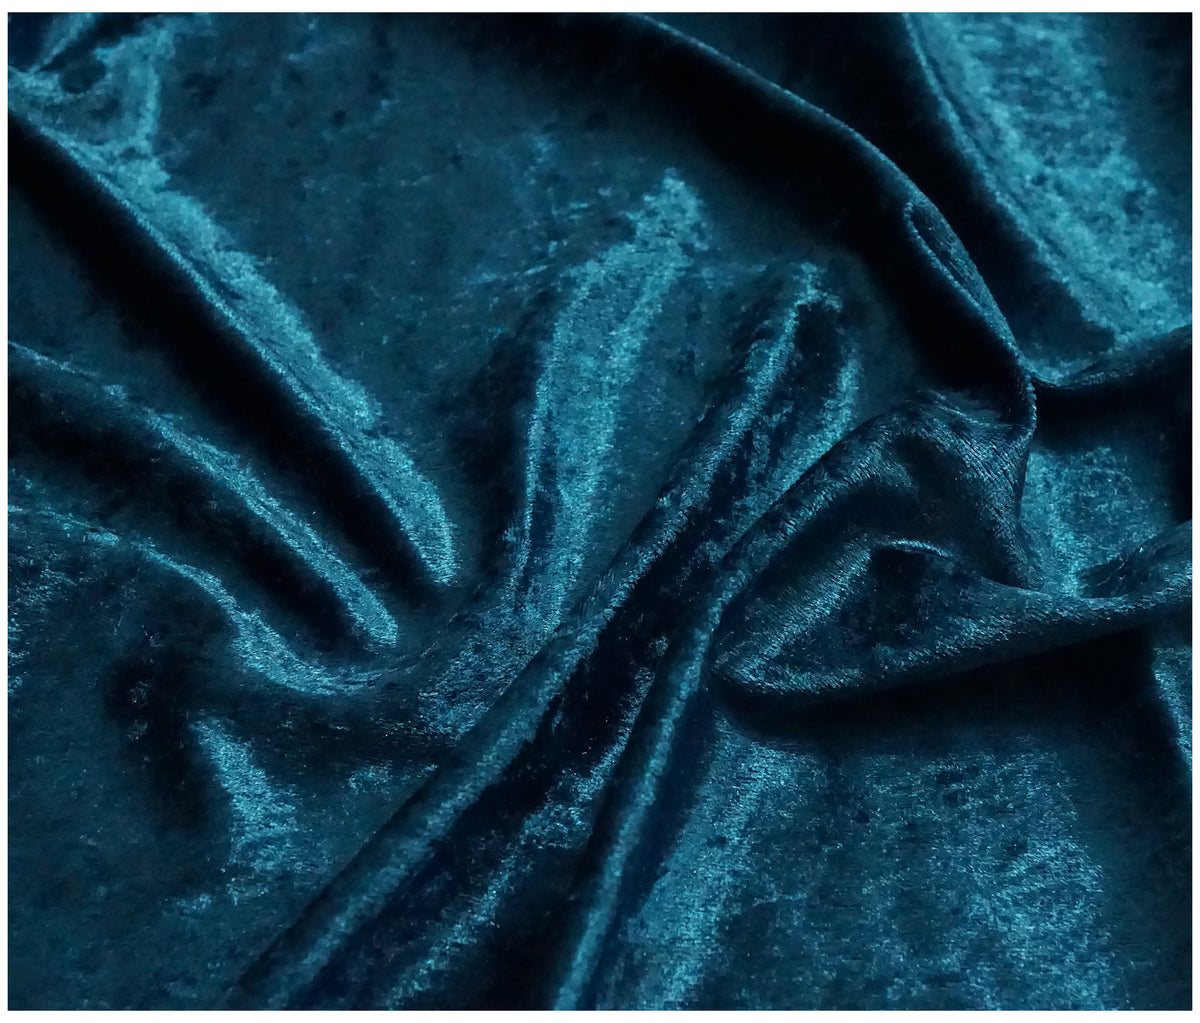 Teal Crushed Velvet - The Fabric Trade